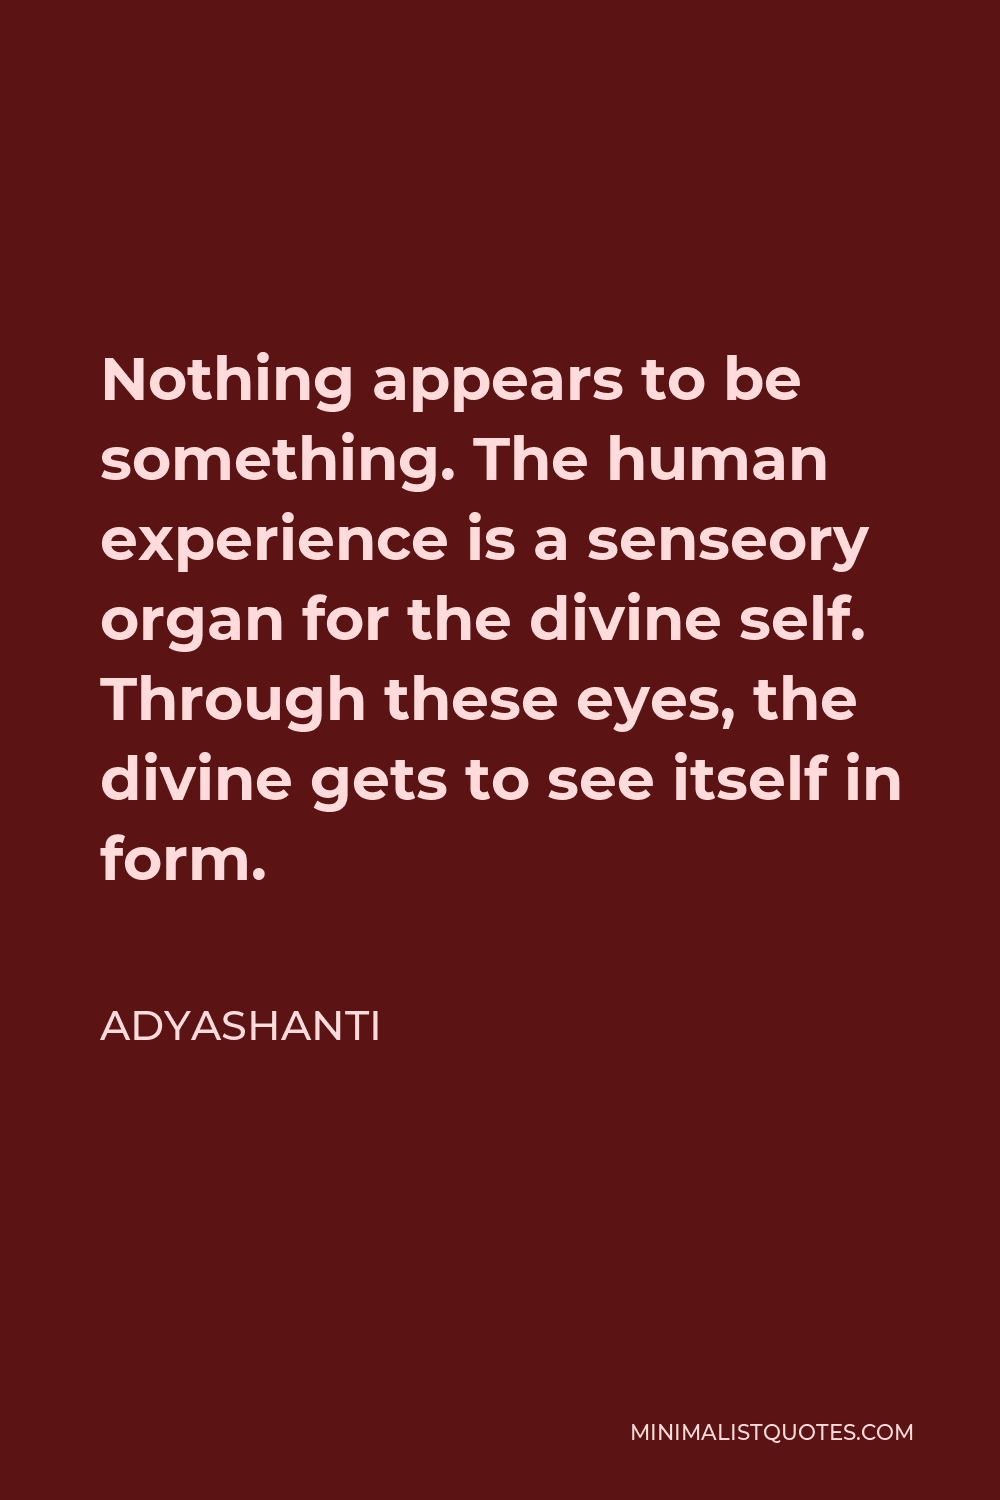 Adyashanti Quote - Nothing appears to be something. The human experience is a senseory organ for the divine self. Through these eyes, the divine gets to see itself in form.